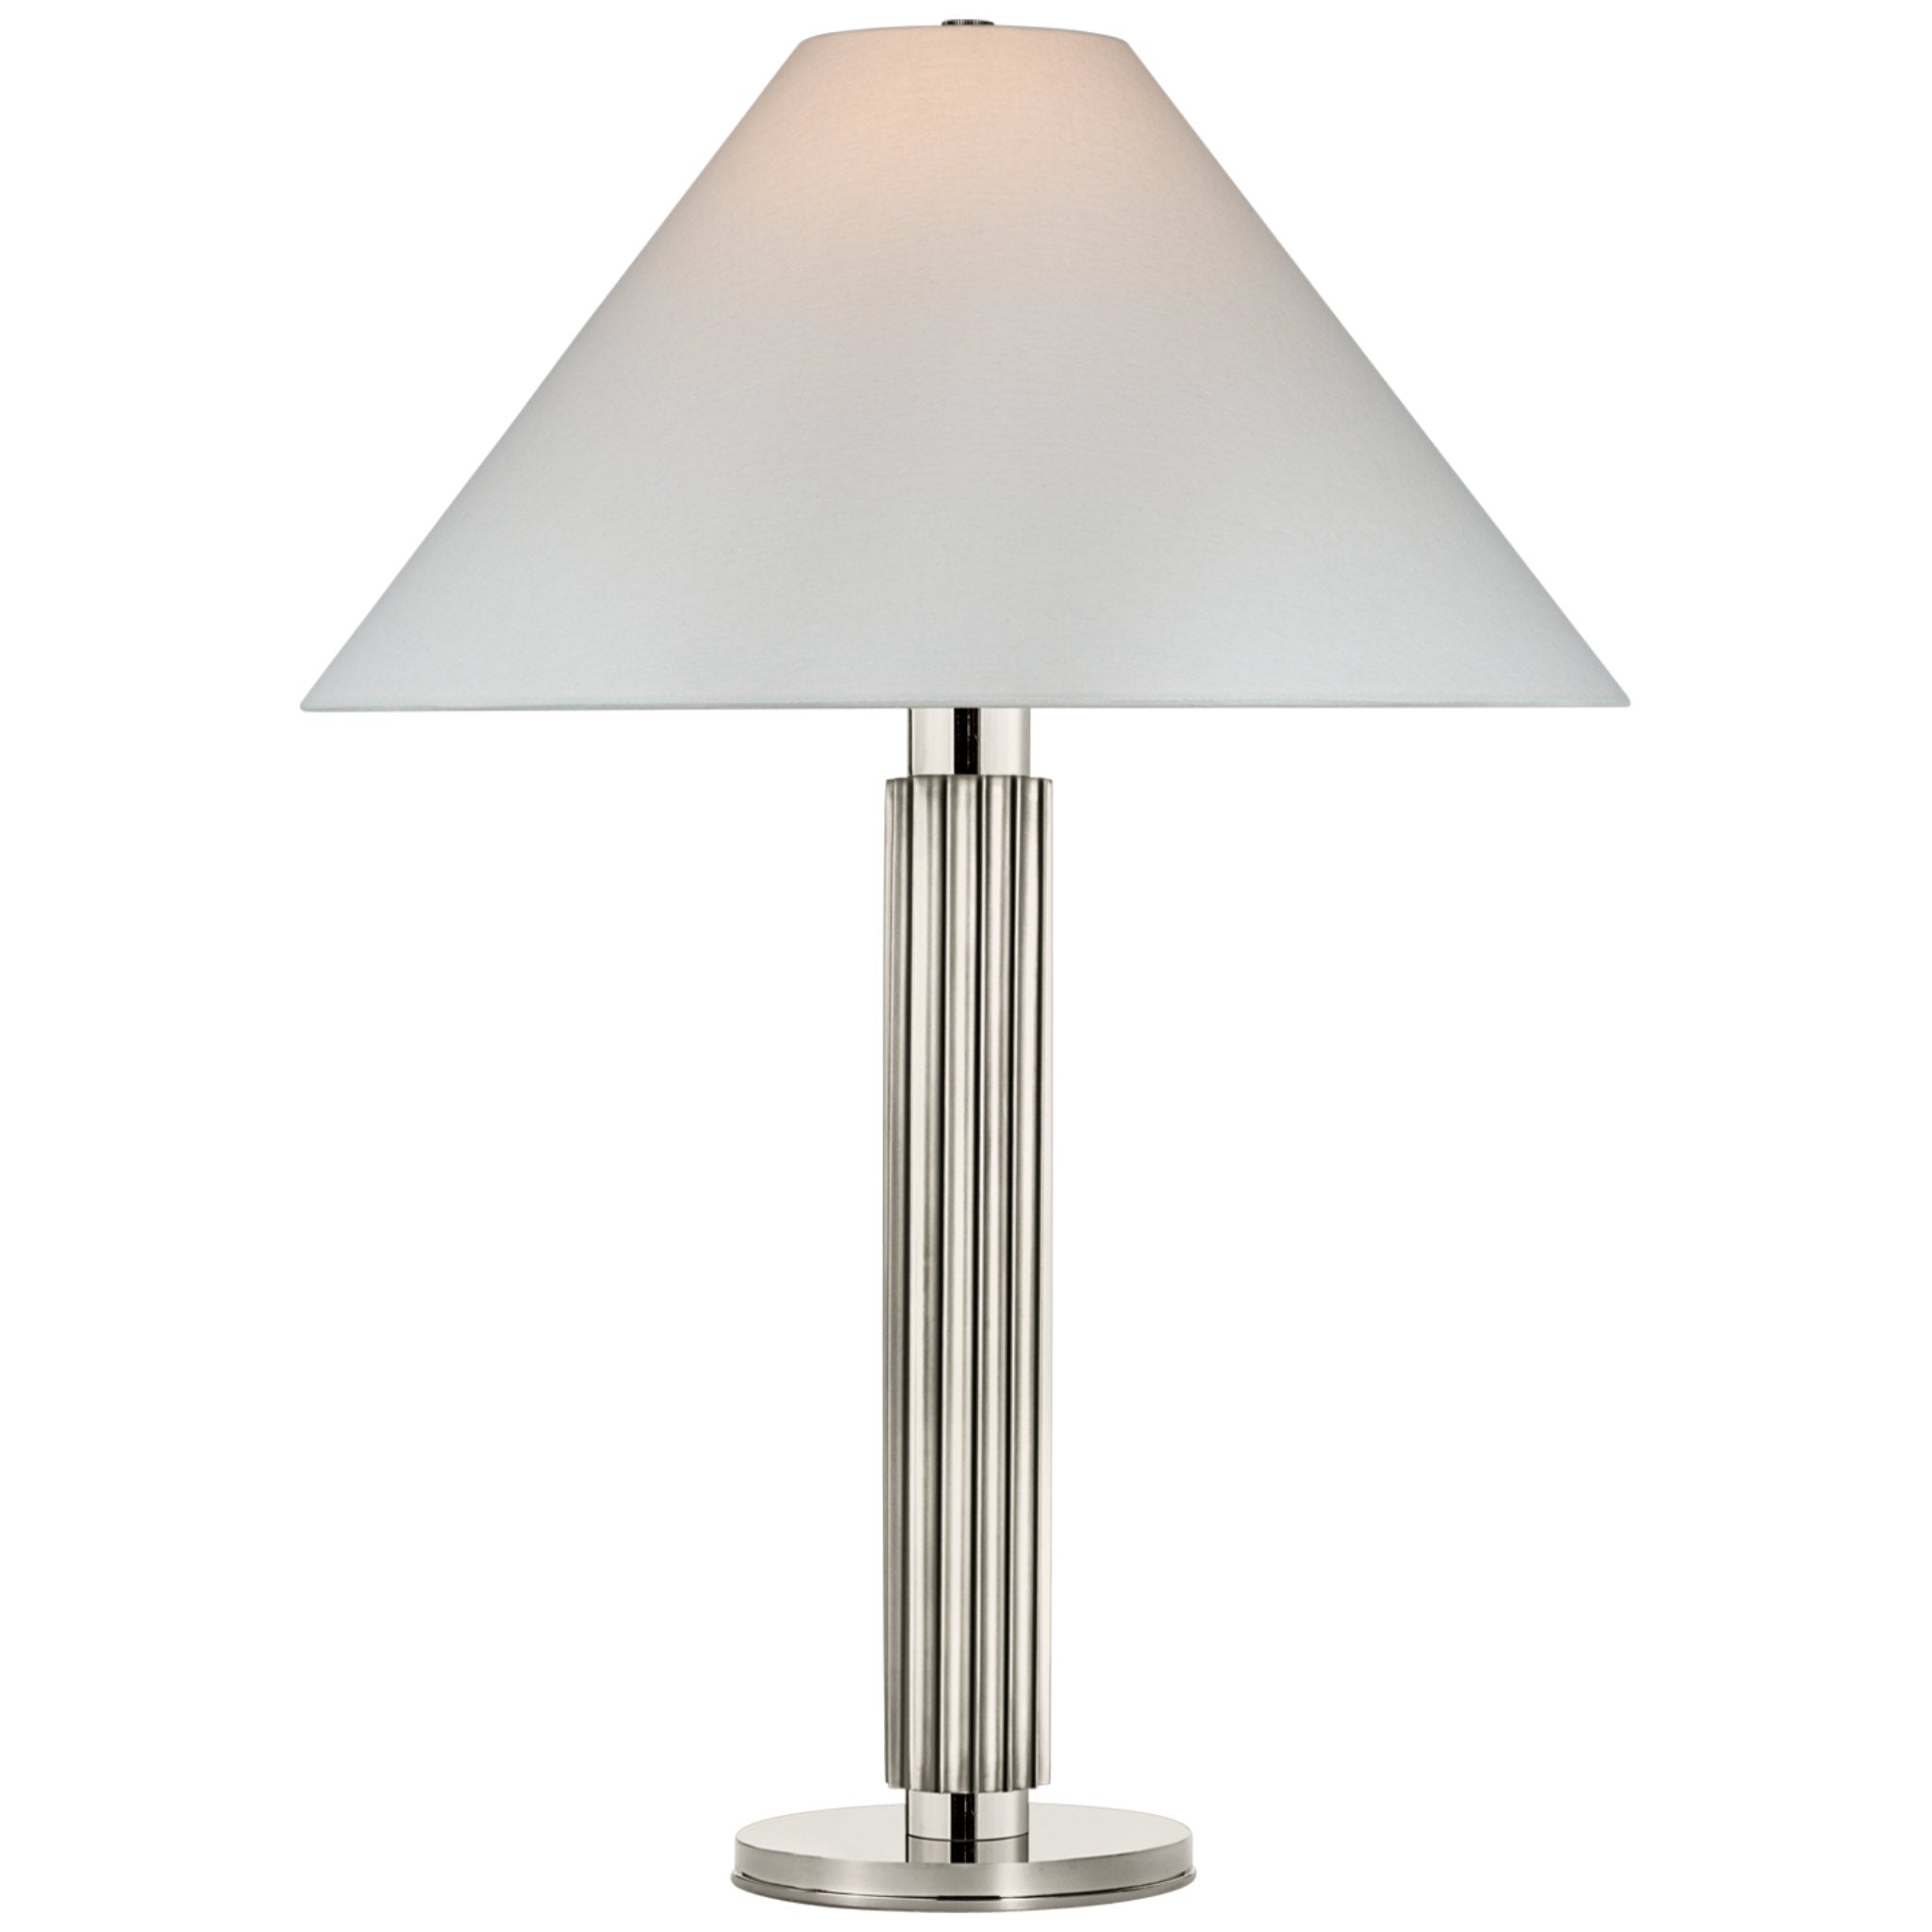 Marie Flanigan Durham Large Table Lamp in Polished Nickel with Linen Shade